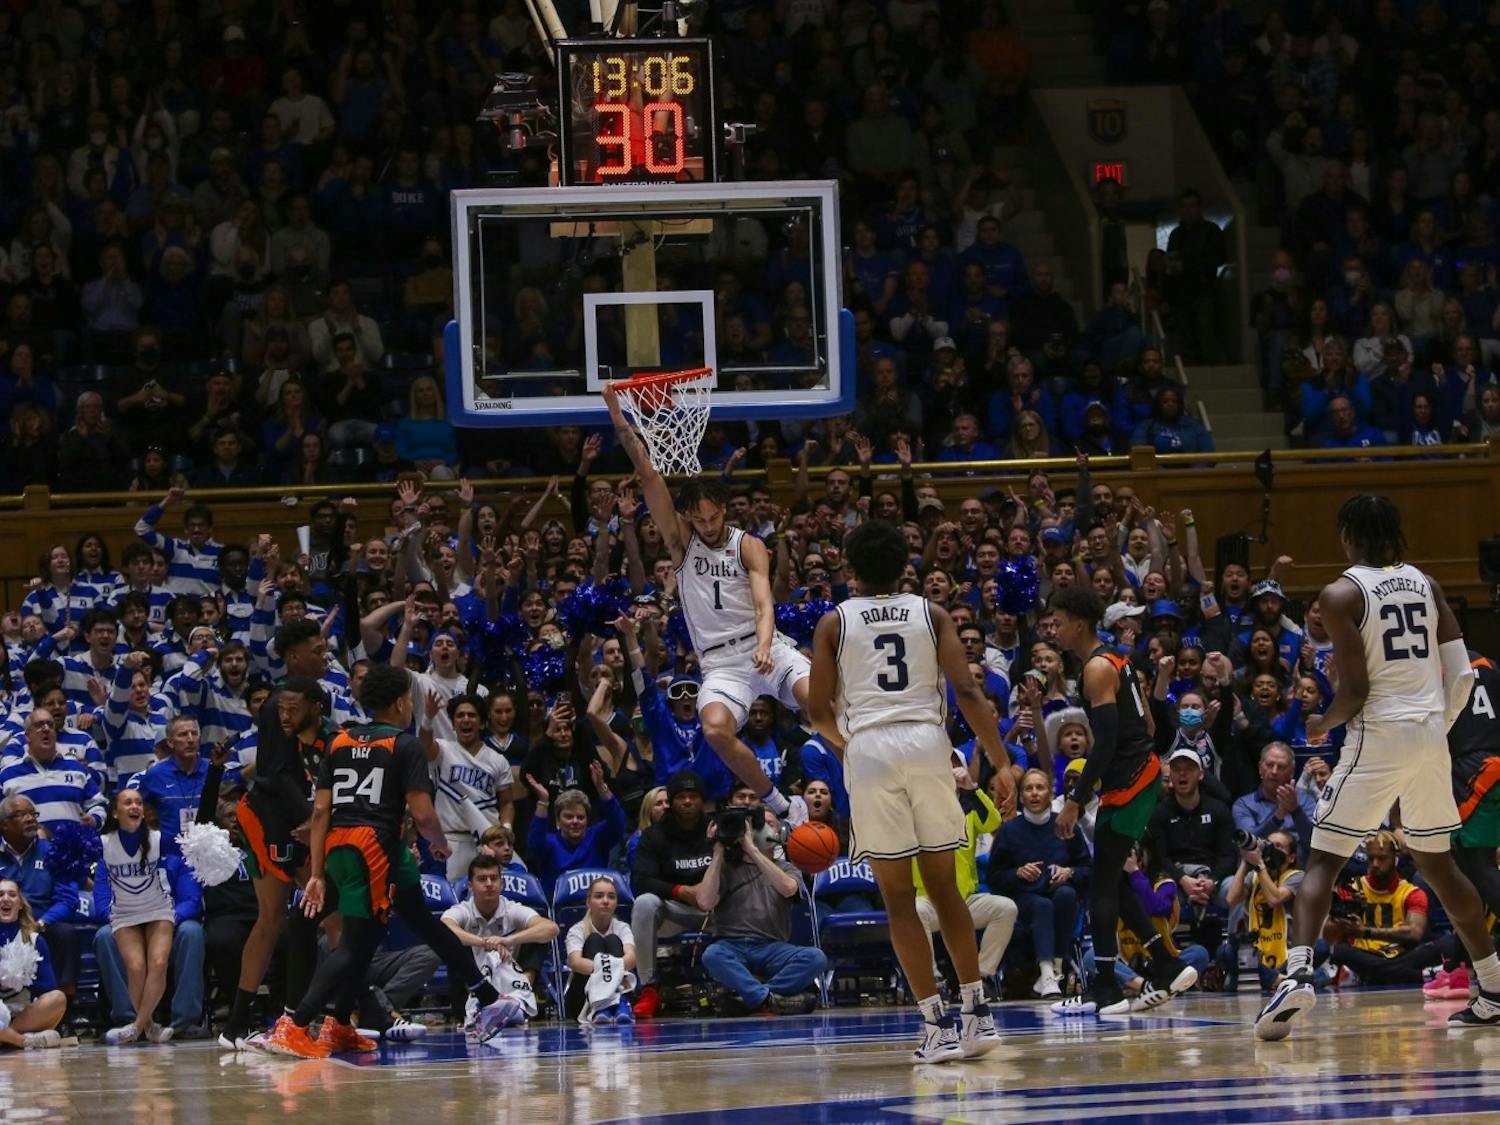 Dereck Lively II hangs from the rim after a dunk against Miami.